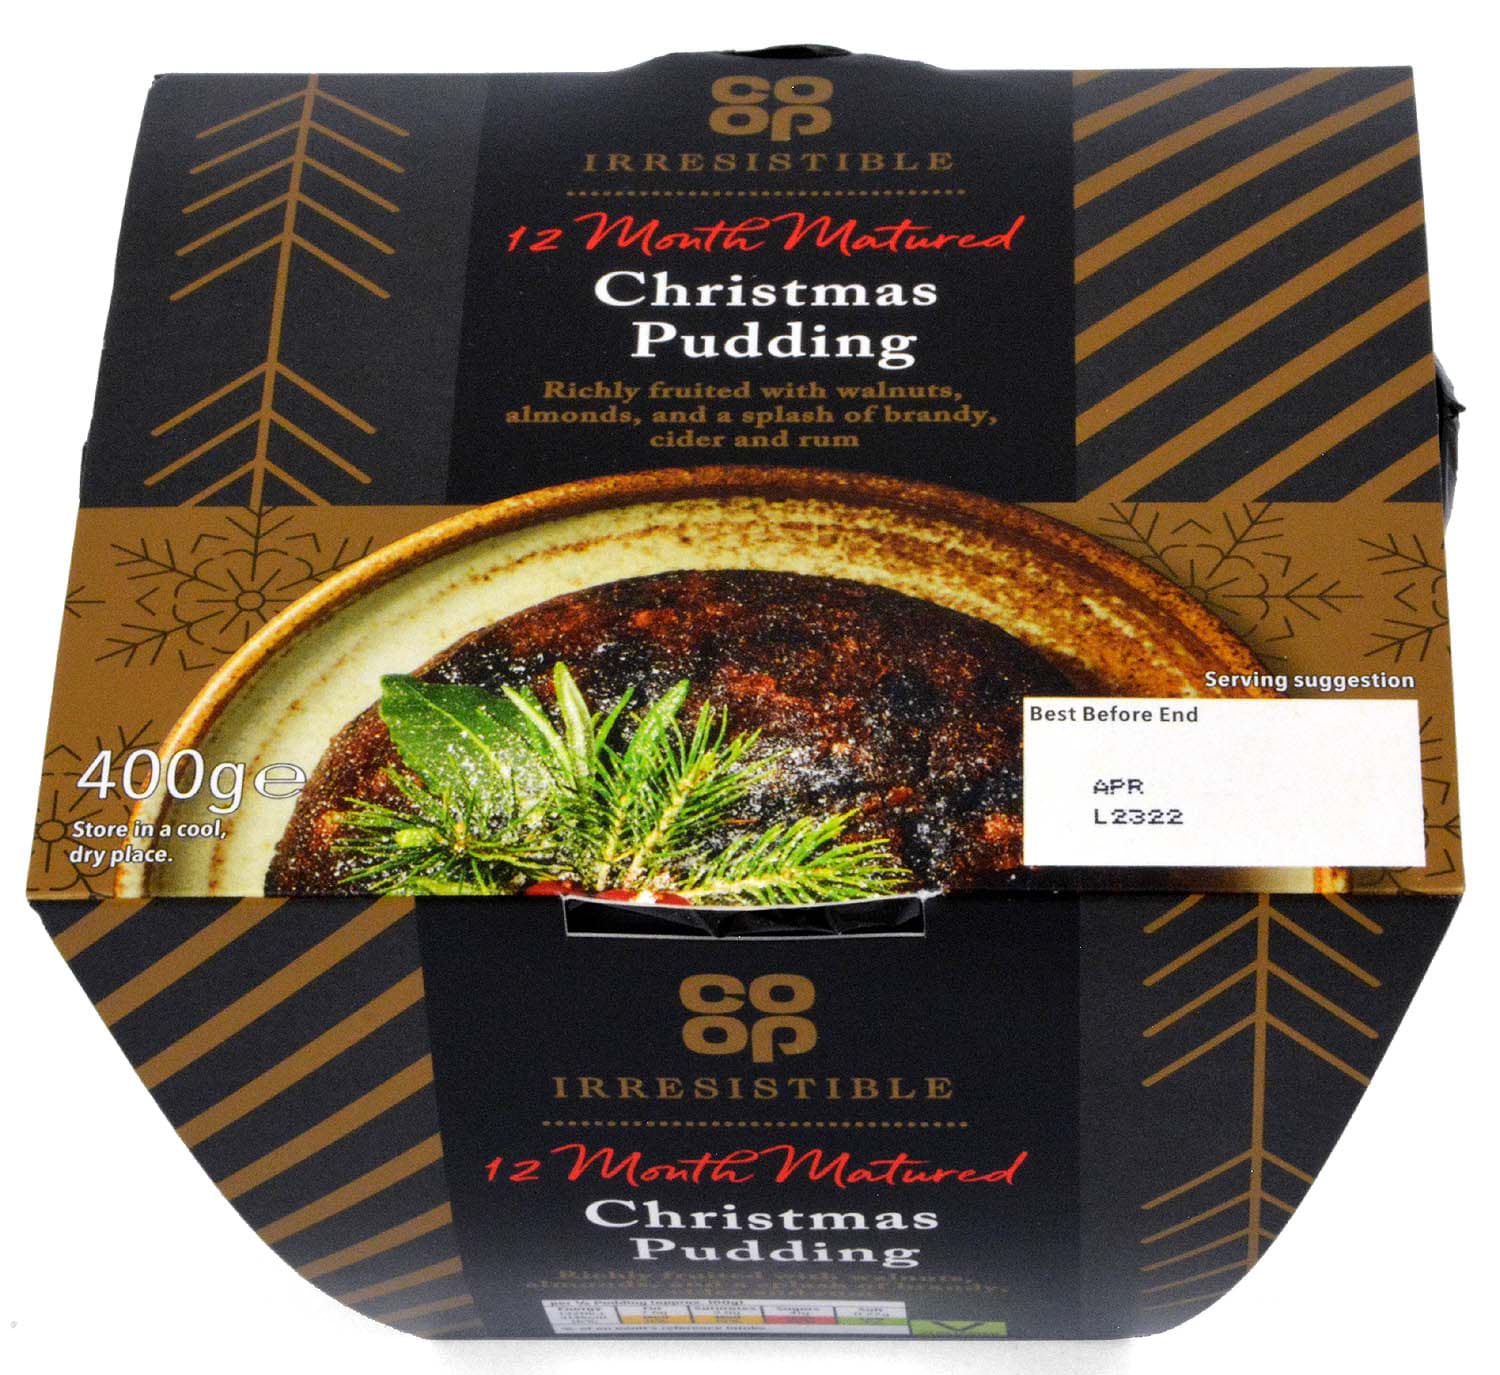 Picture of Co-op Christmas Pudding 12 Month Matured 400g